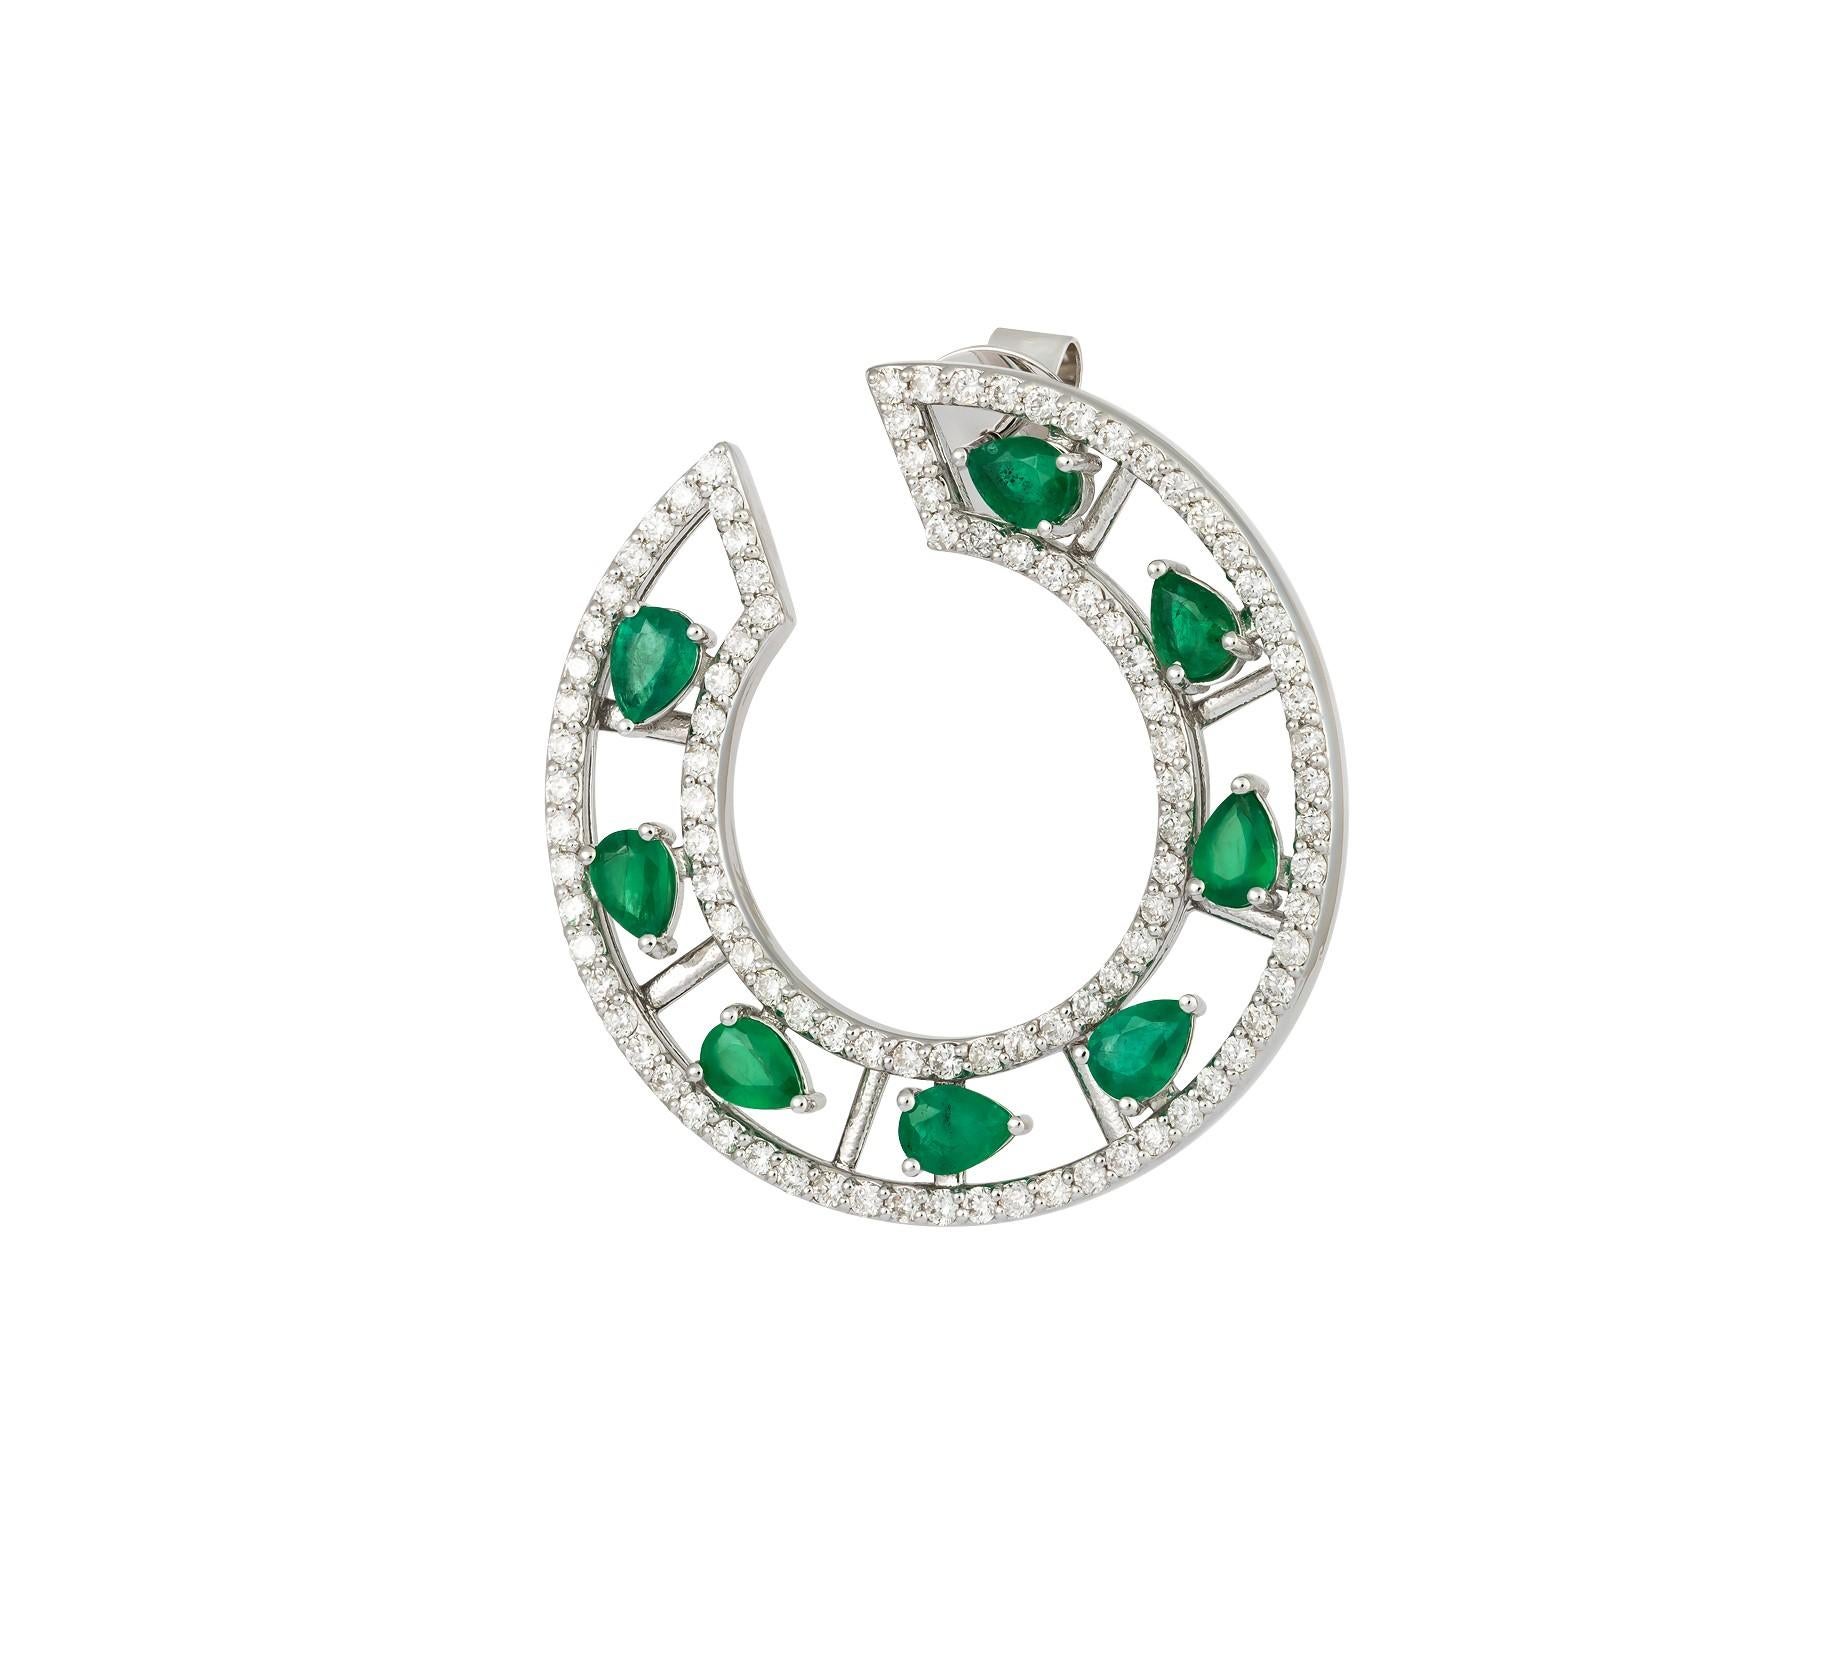 The Following Items we are offering is a Rare Important Radiant Pair of 18KT Gold Large Glistening Magnificent Large Fancy Emerald and Diamond C Shape Twist Earrings. Stones are Very Clean and Extremely Fine! T.C.W. Approx 4CTS!!! 

Comes New with